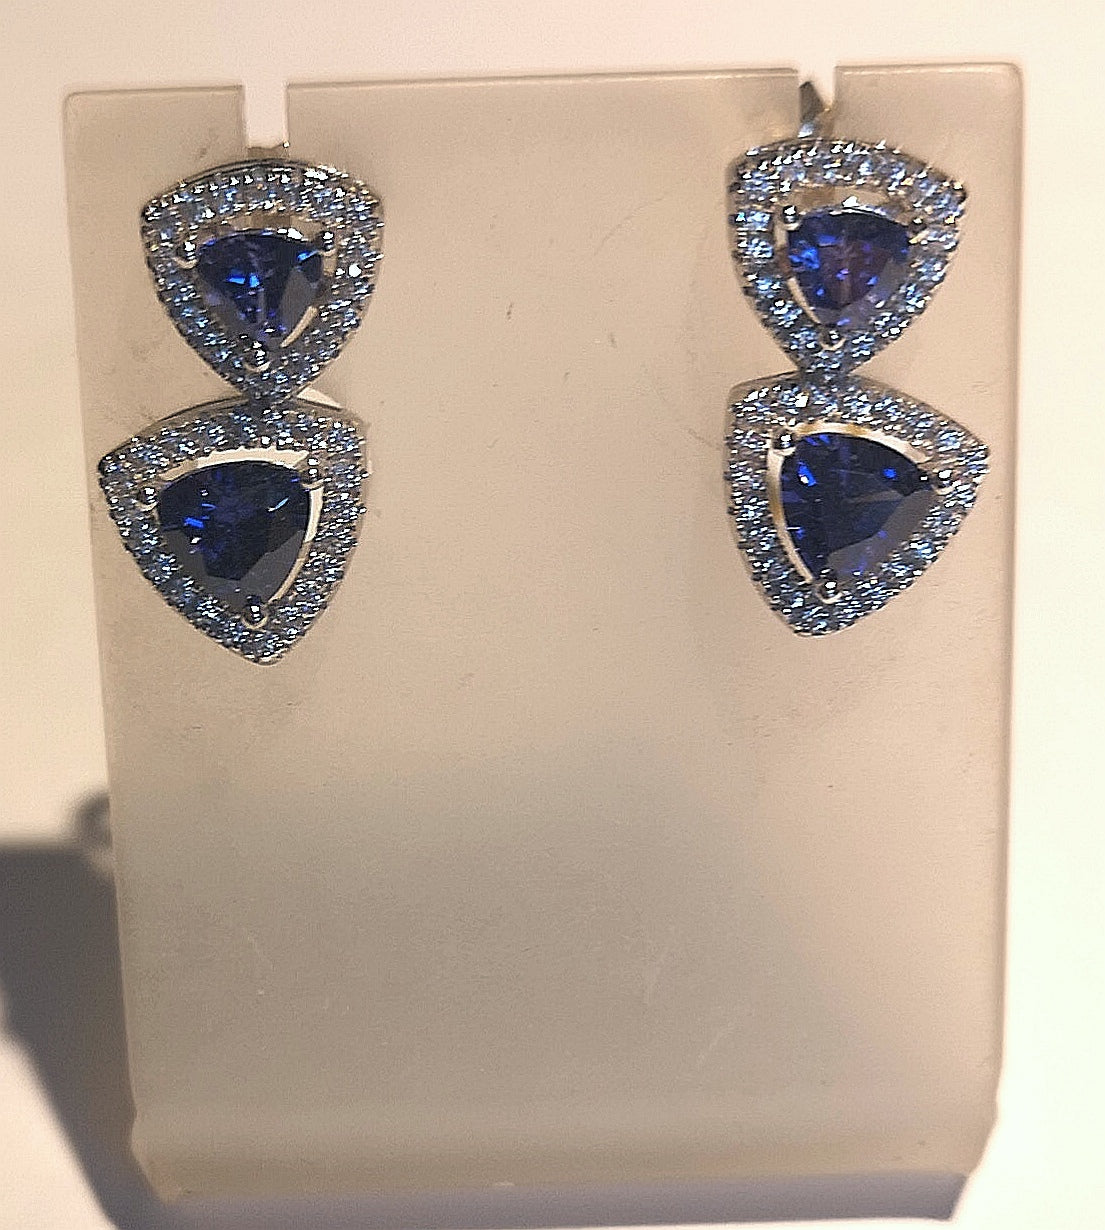 Sapphire look alike cubic earrings in sterling silver with rhodium finish